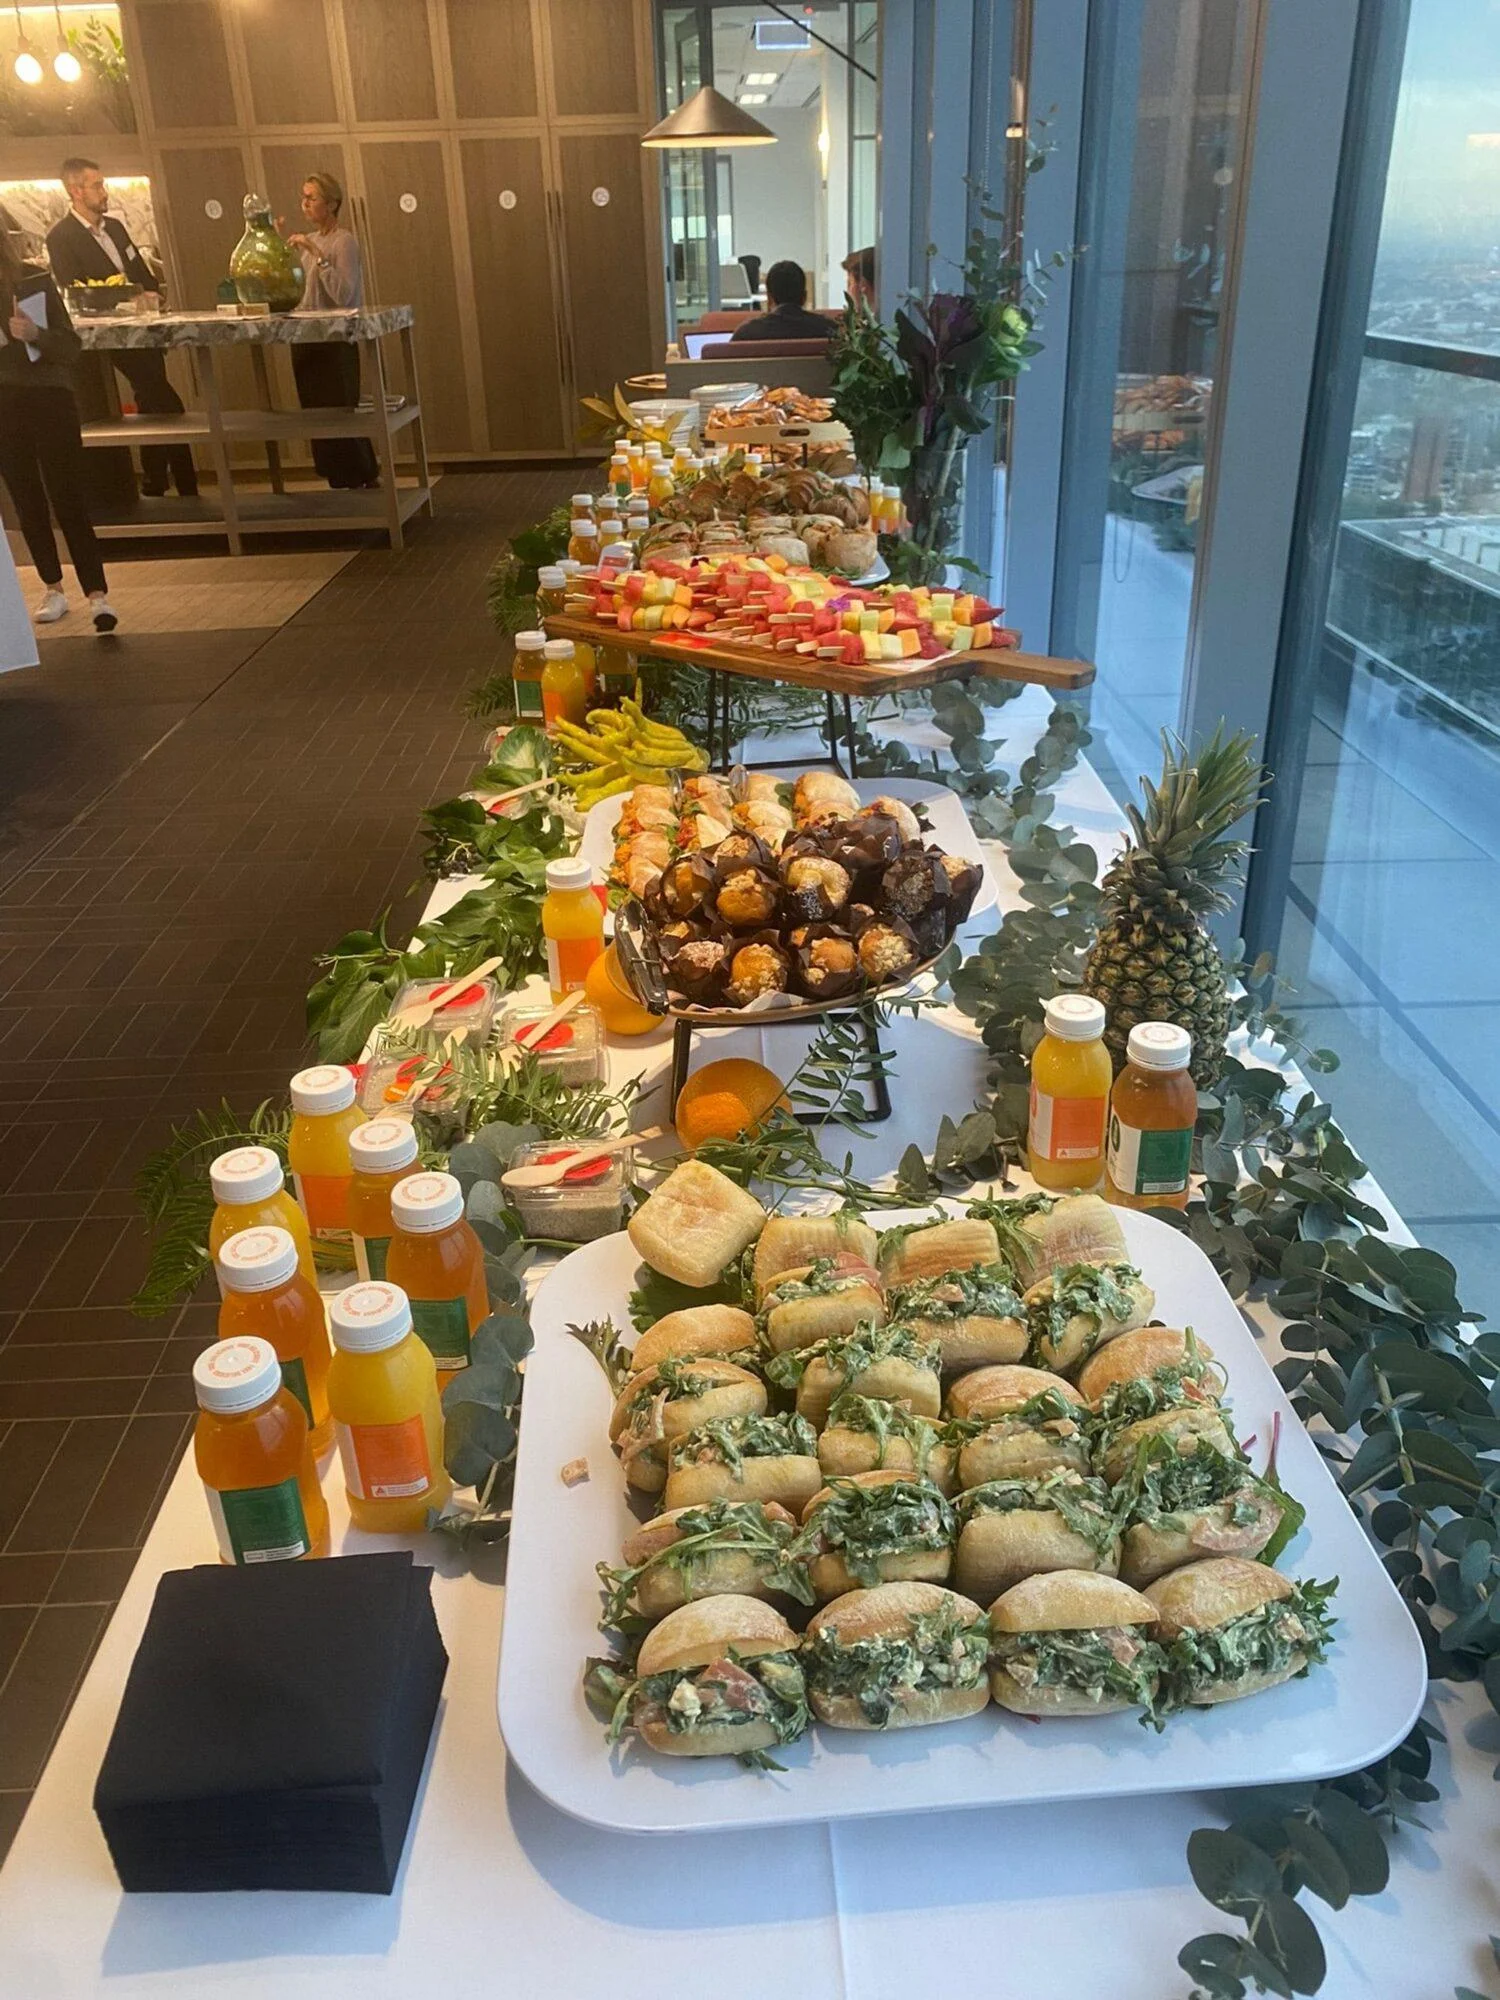 No.1 Top Rated Melbourne Office Catering